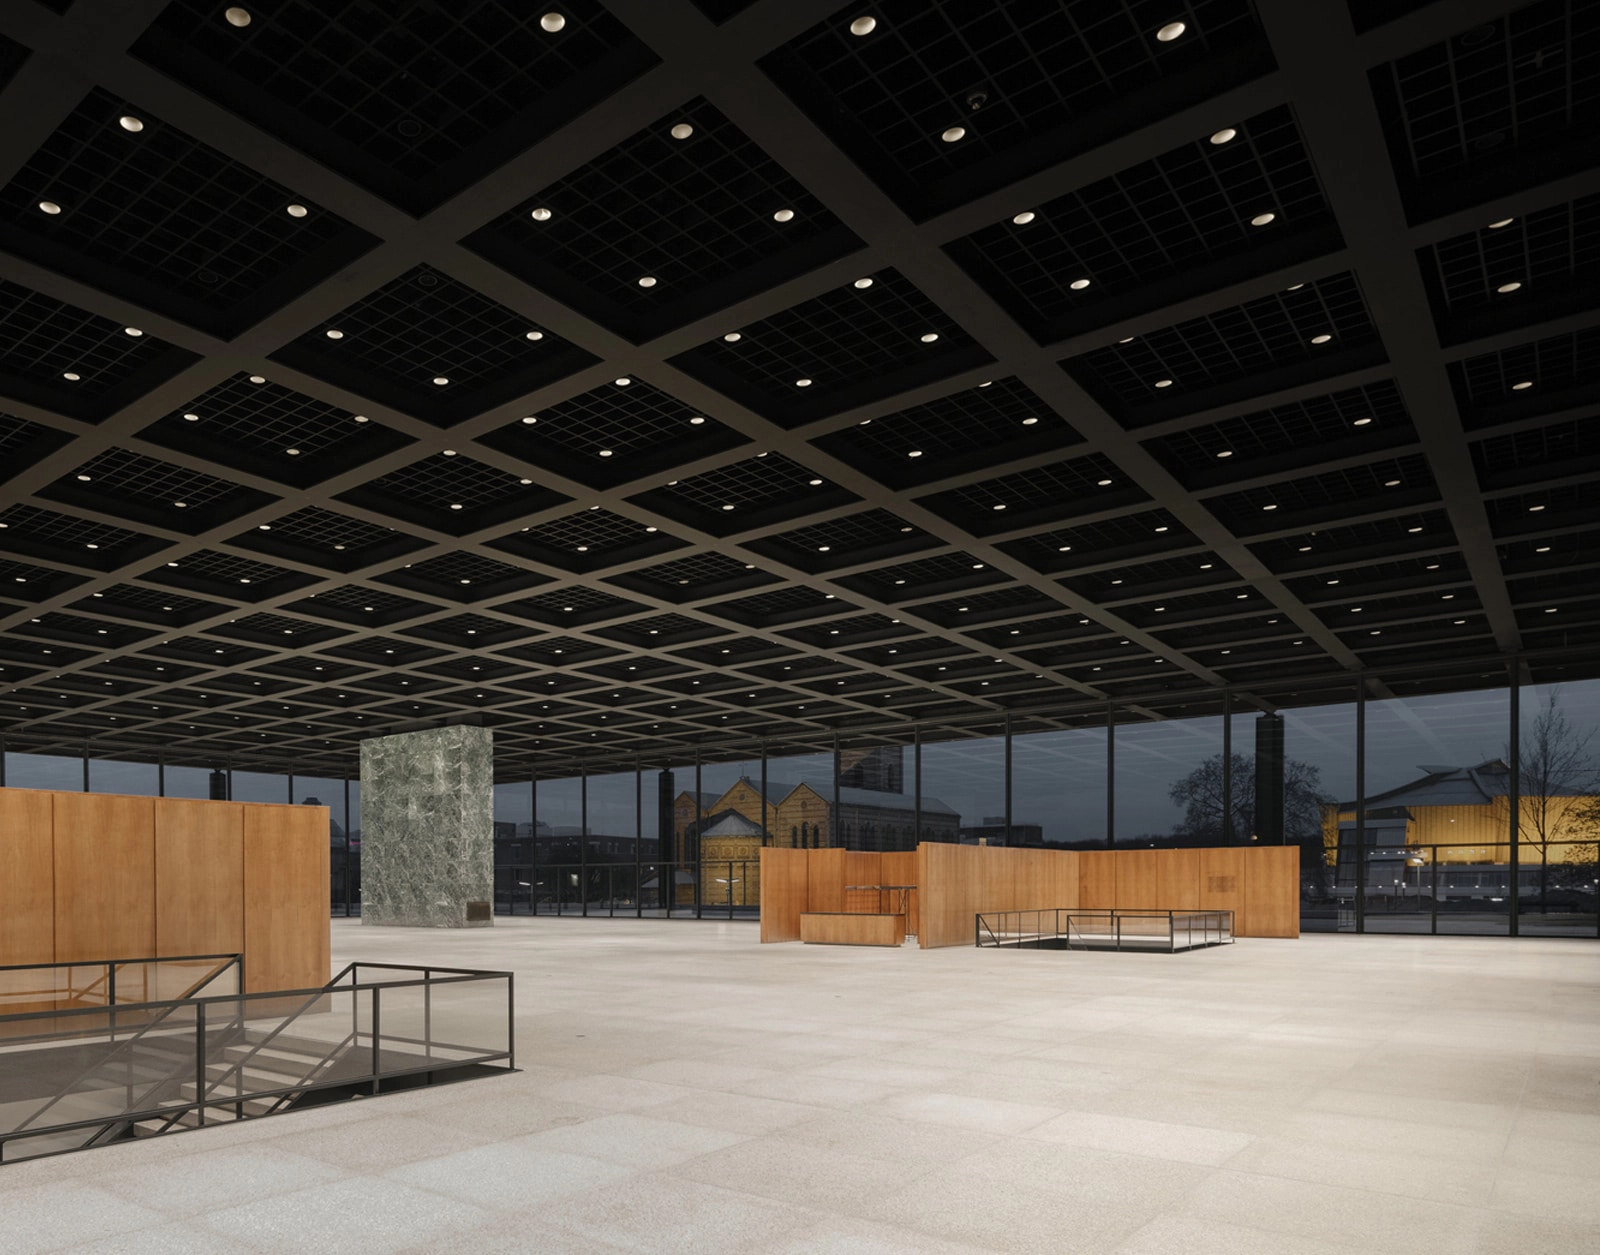 Image of 20210625 Chipperfield NeueNationalgalerieRefurbishment 07.1 1 in Neue Nationalgalerie Refurbishment - Cosentino